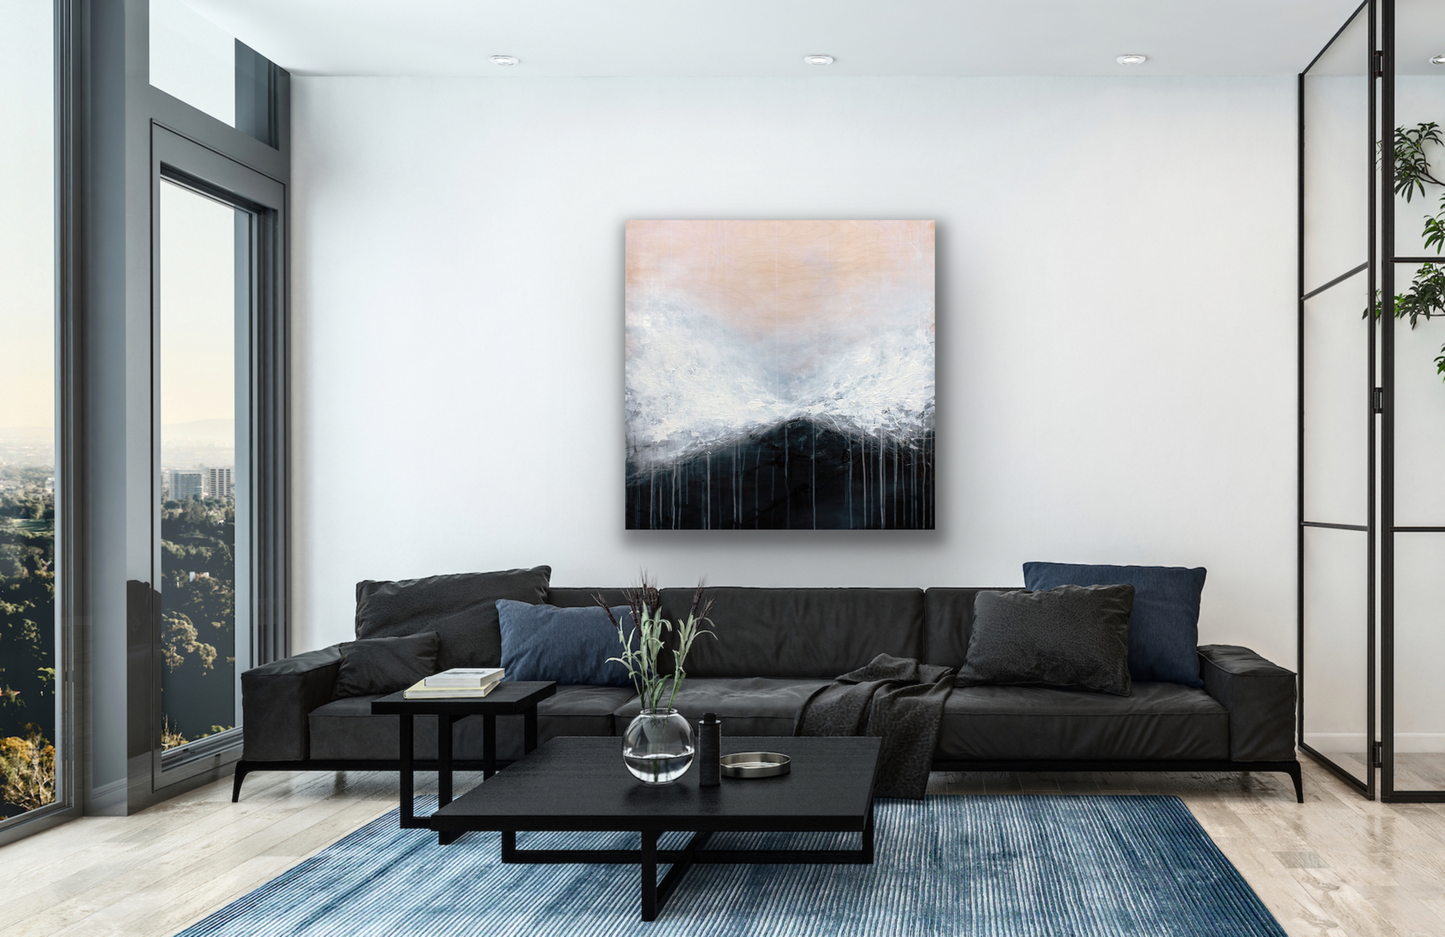 Just imagine this stunning abstract work of art being center stage in you r living room.  The art piece would also look good in a dining room, hallway or bedroom.